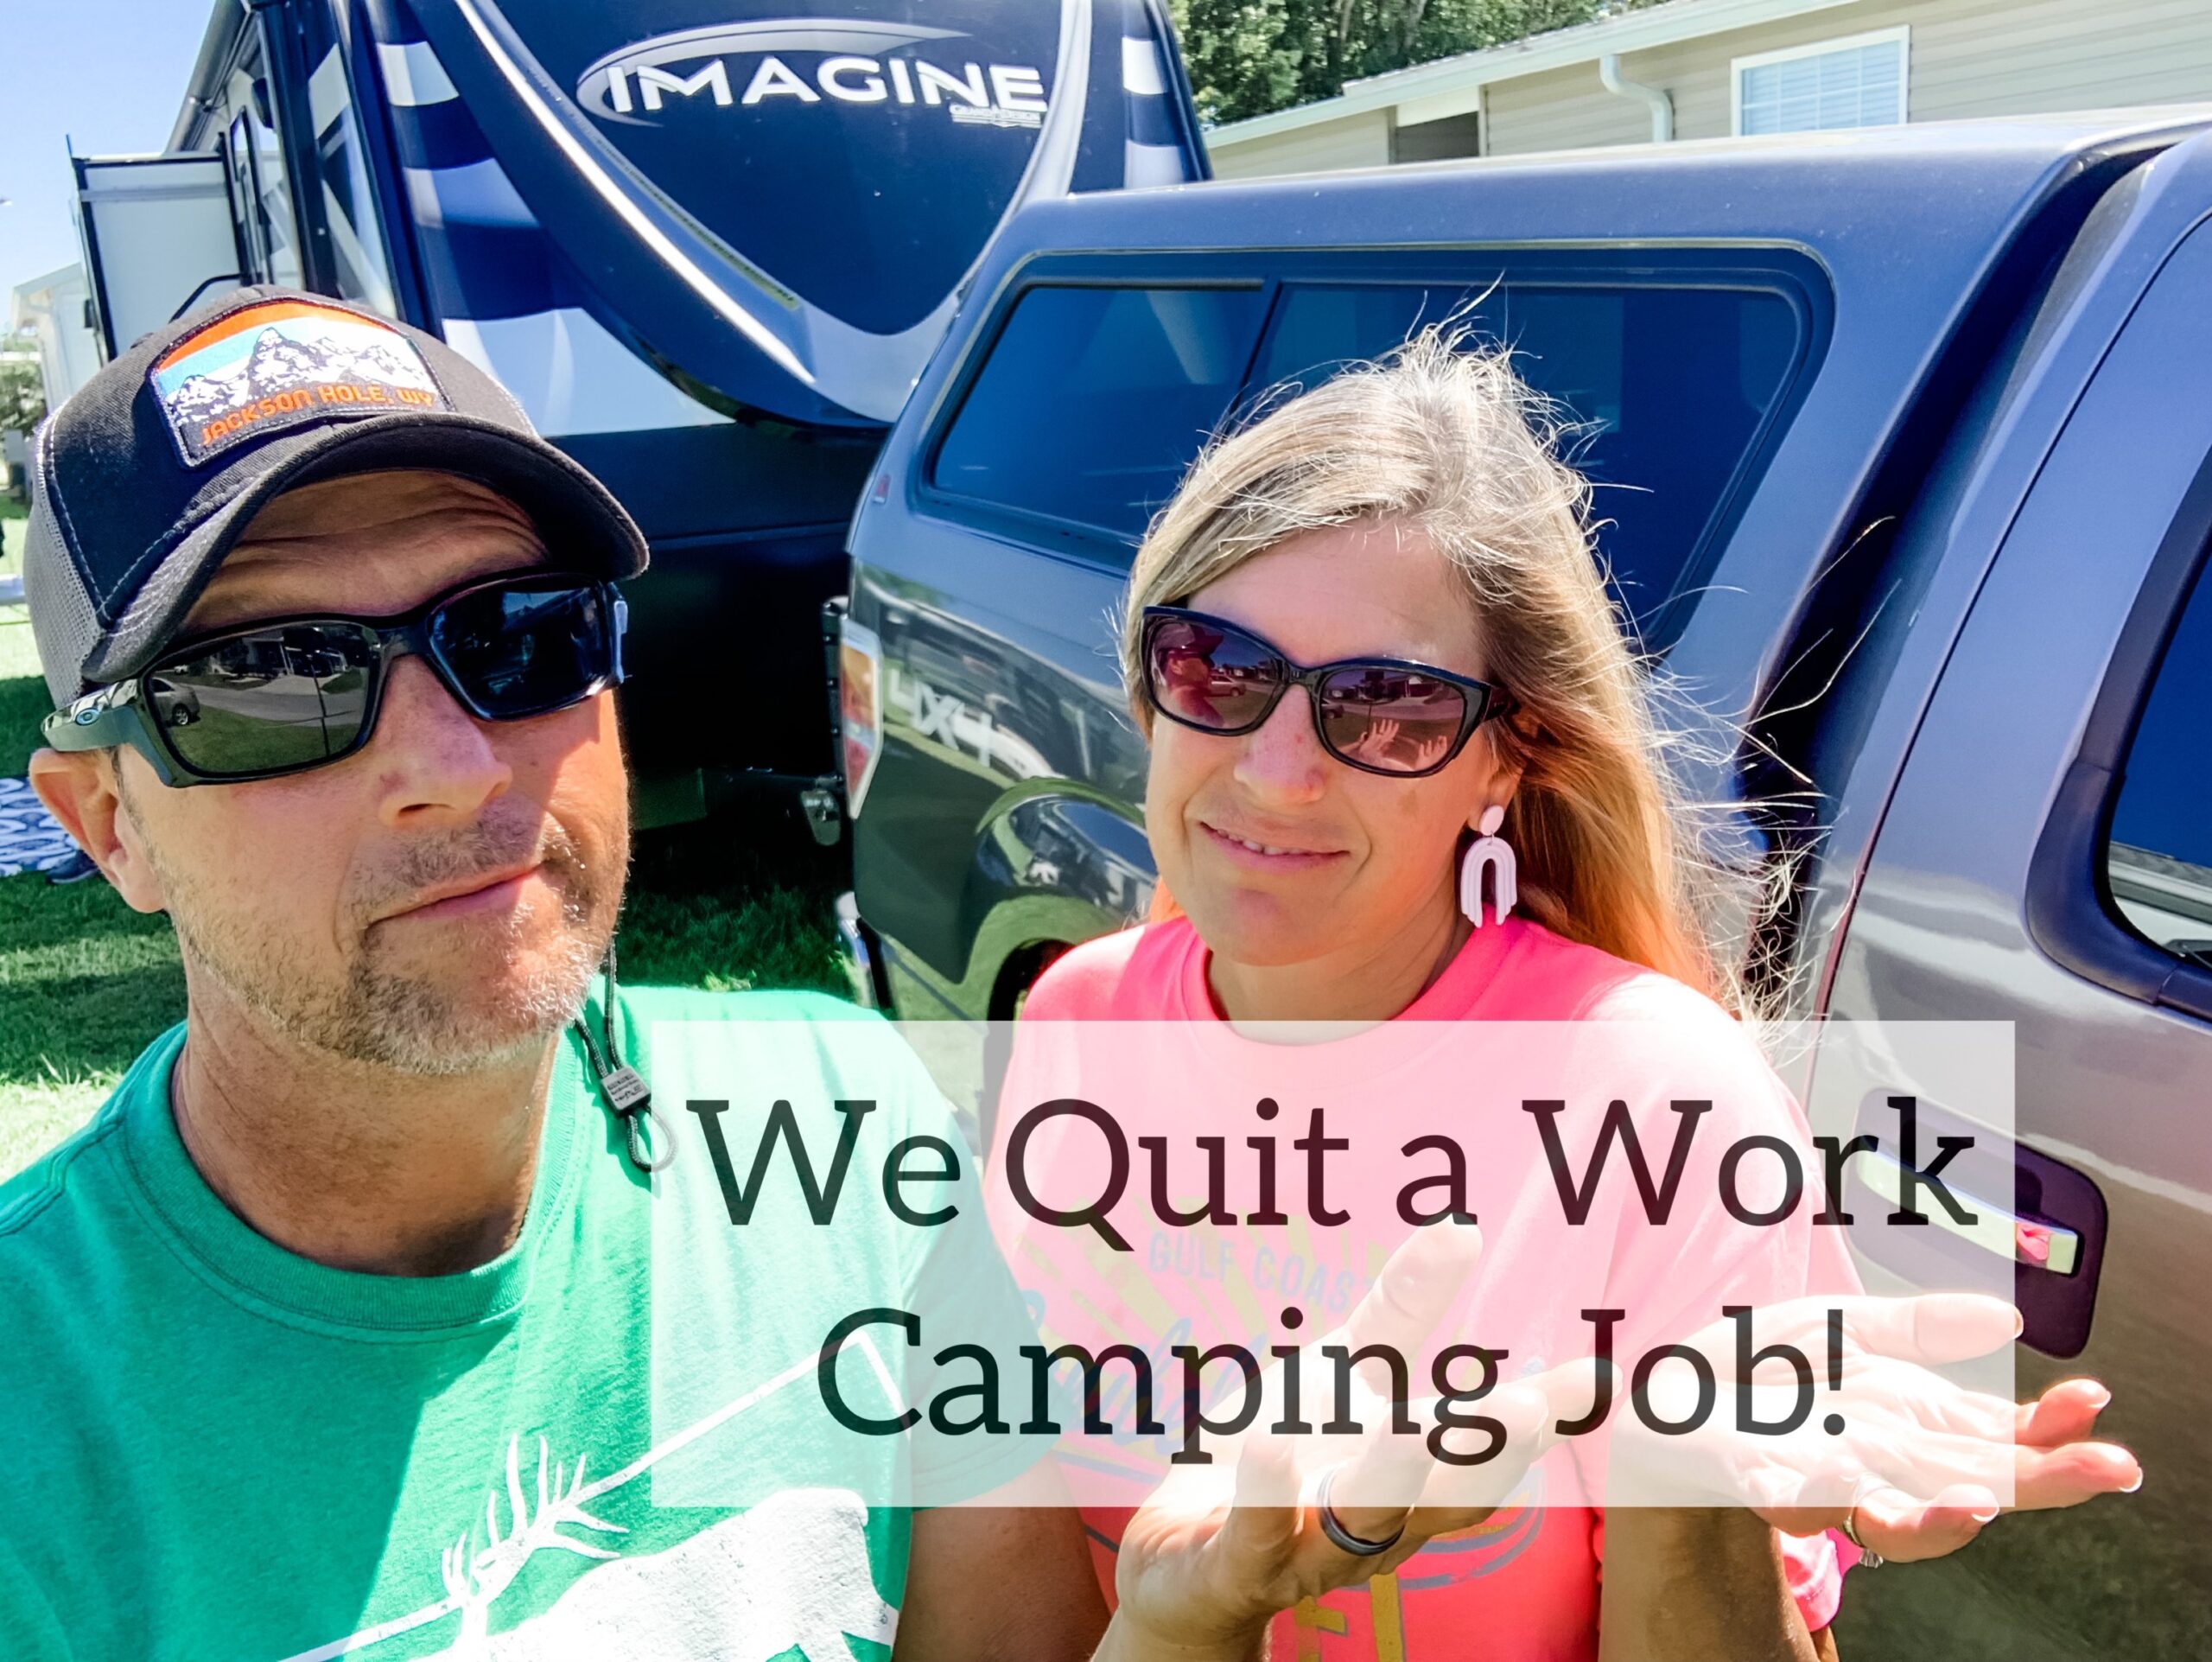 Is It Okay to Quit a Work Camping Job? Why Not Wander?